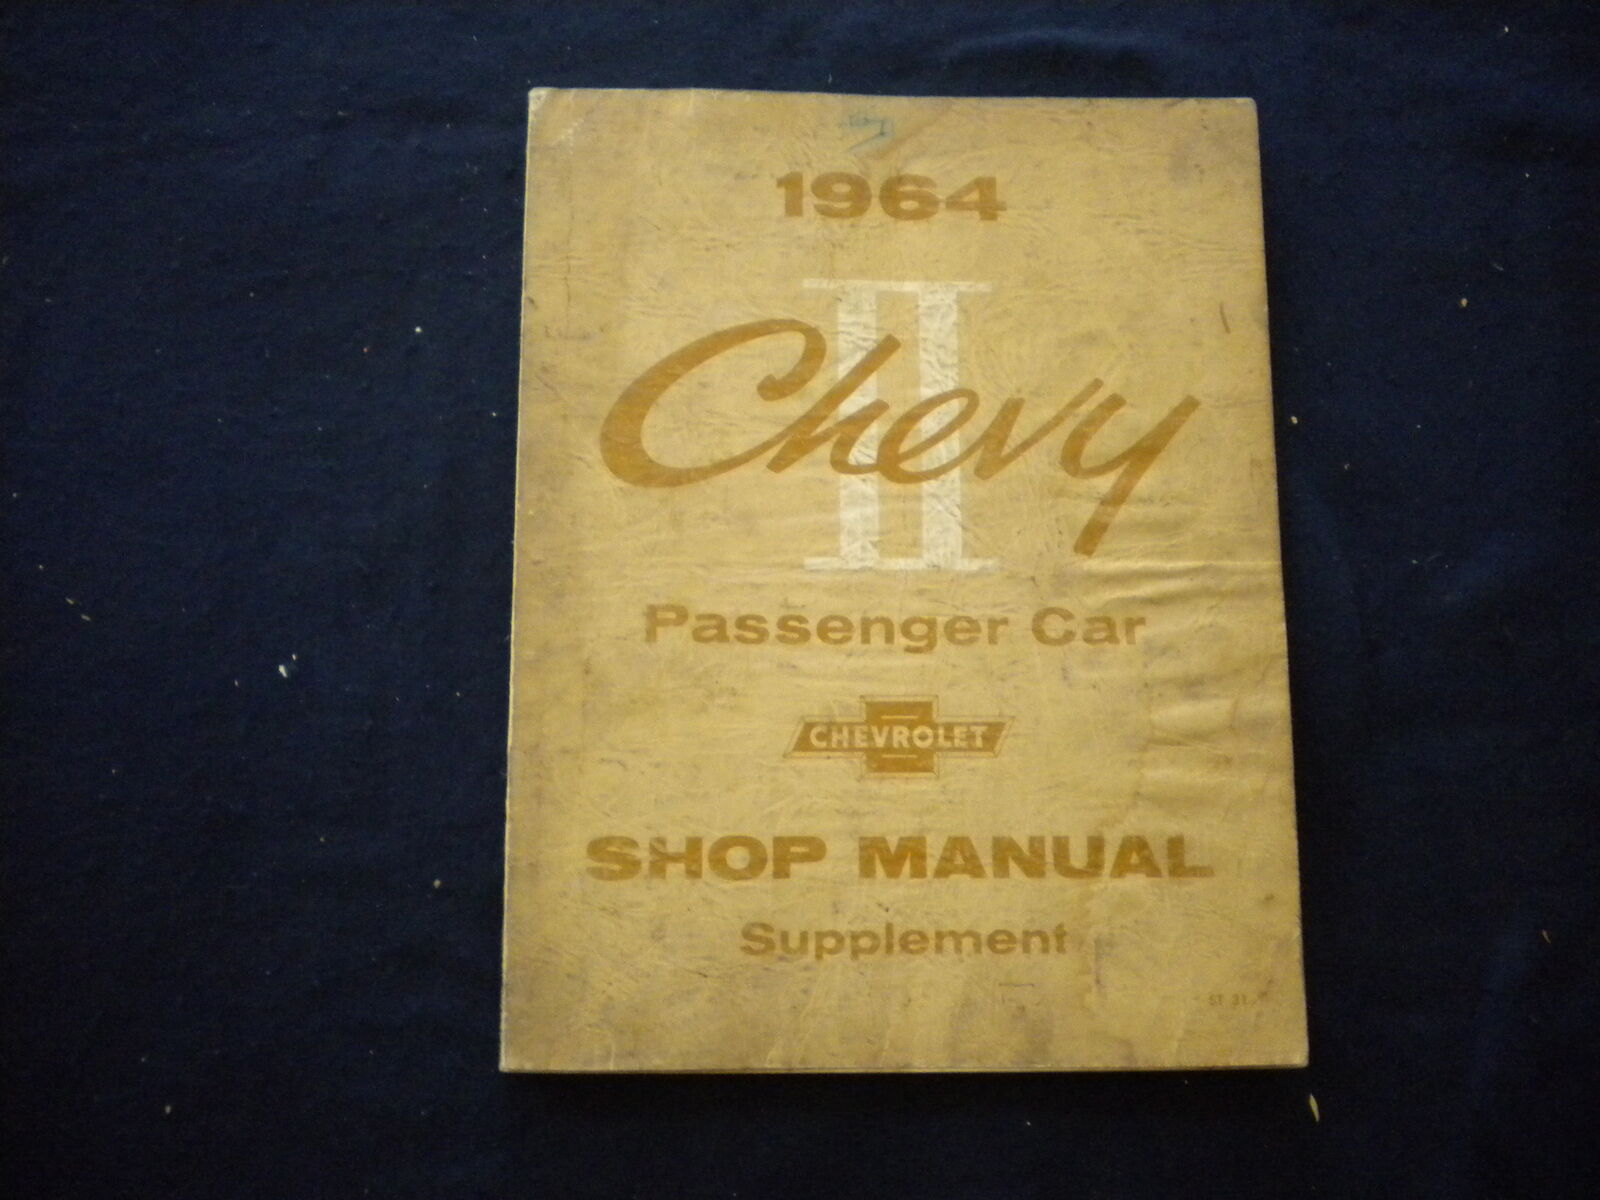 1964 CHEVY PASSENGER CAR SHOP MANUAL SUPPLEMENT - SOFTCOVER - KD 8014